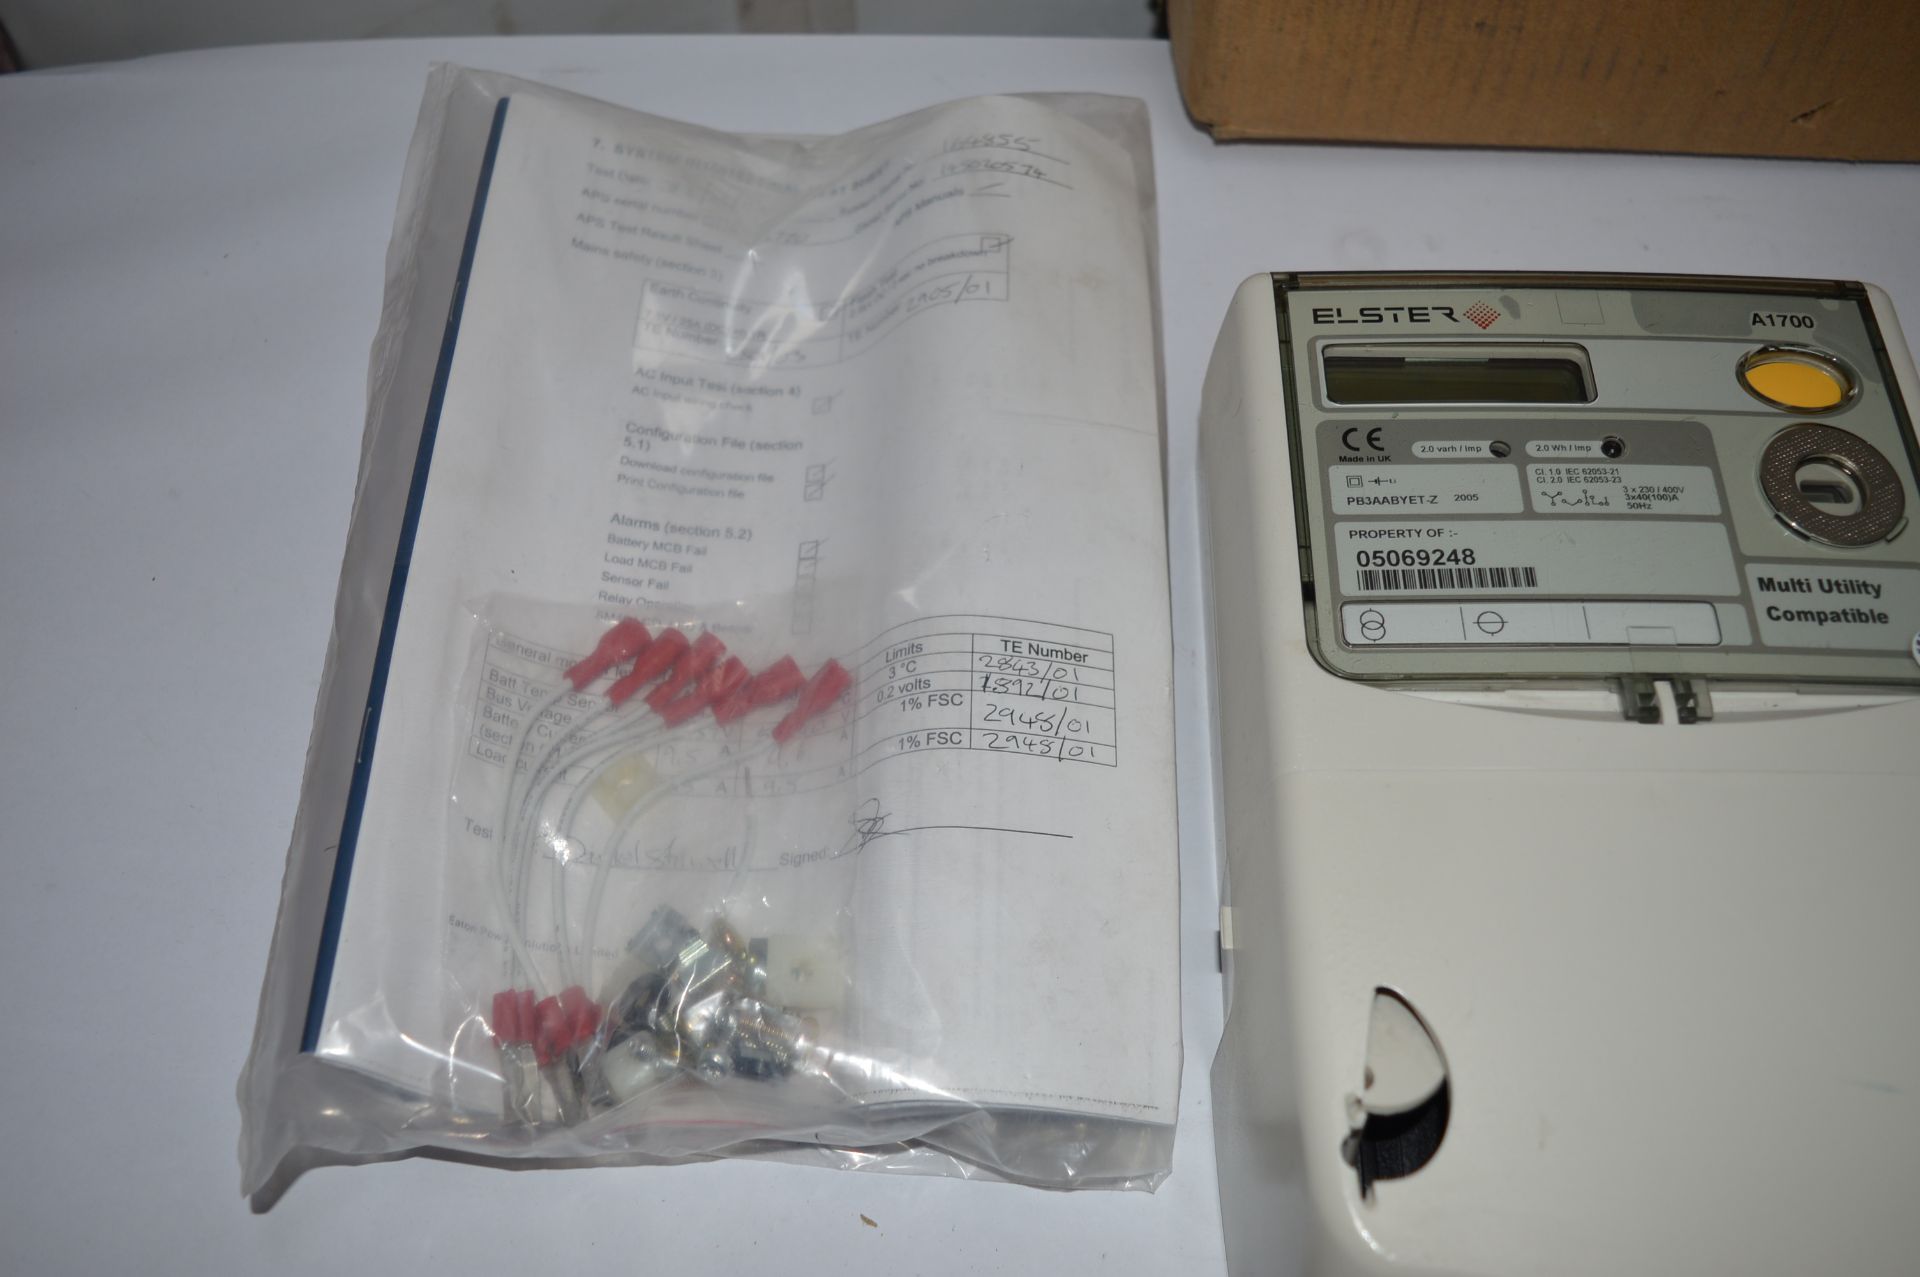 2 x Elstar ABB Programmable Polyphase Smart Meters - Mutli Utility Compatible - Model A1700 - - Image 2 of 9